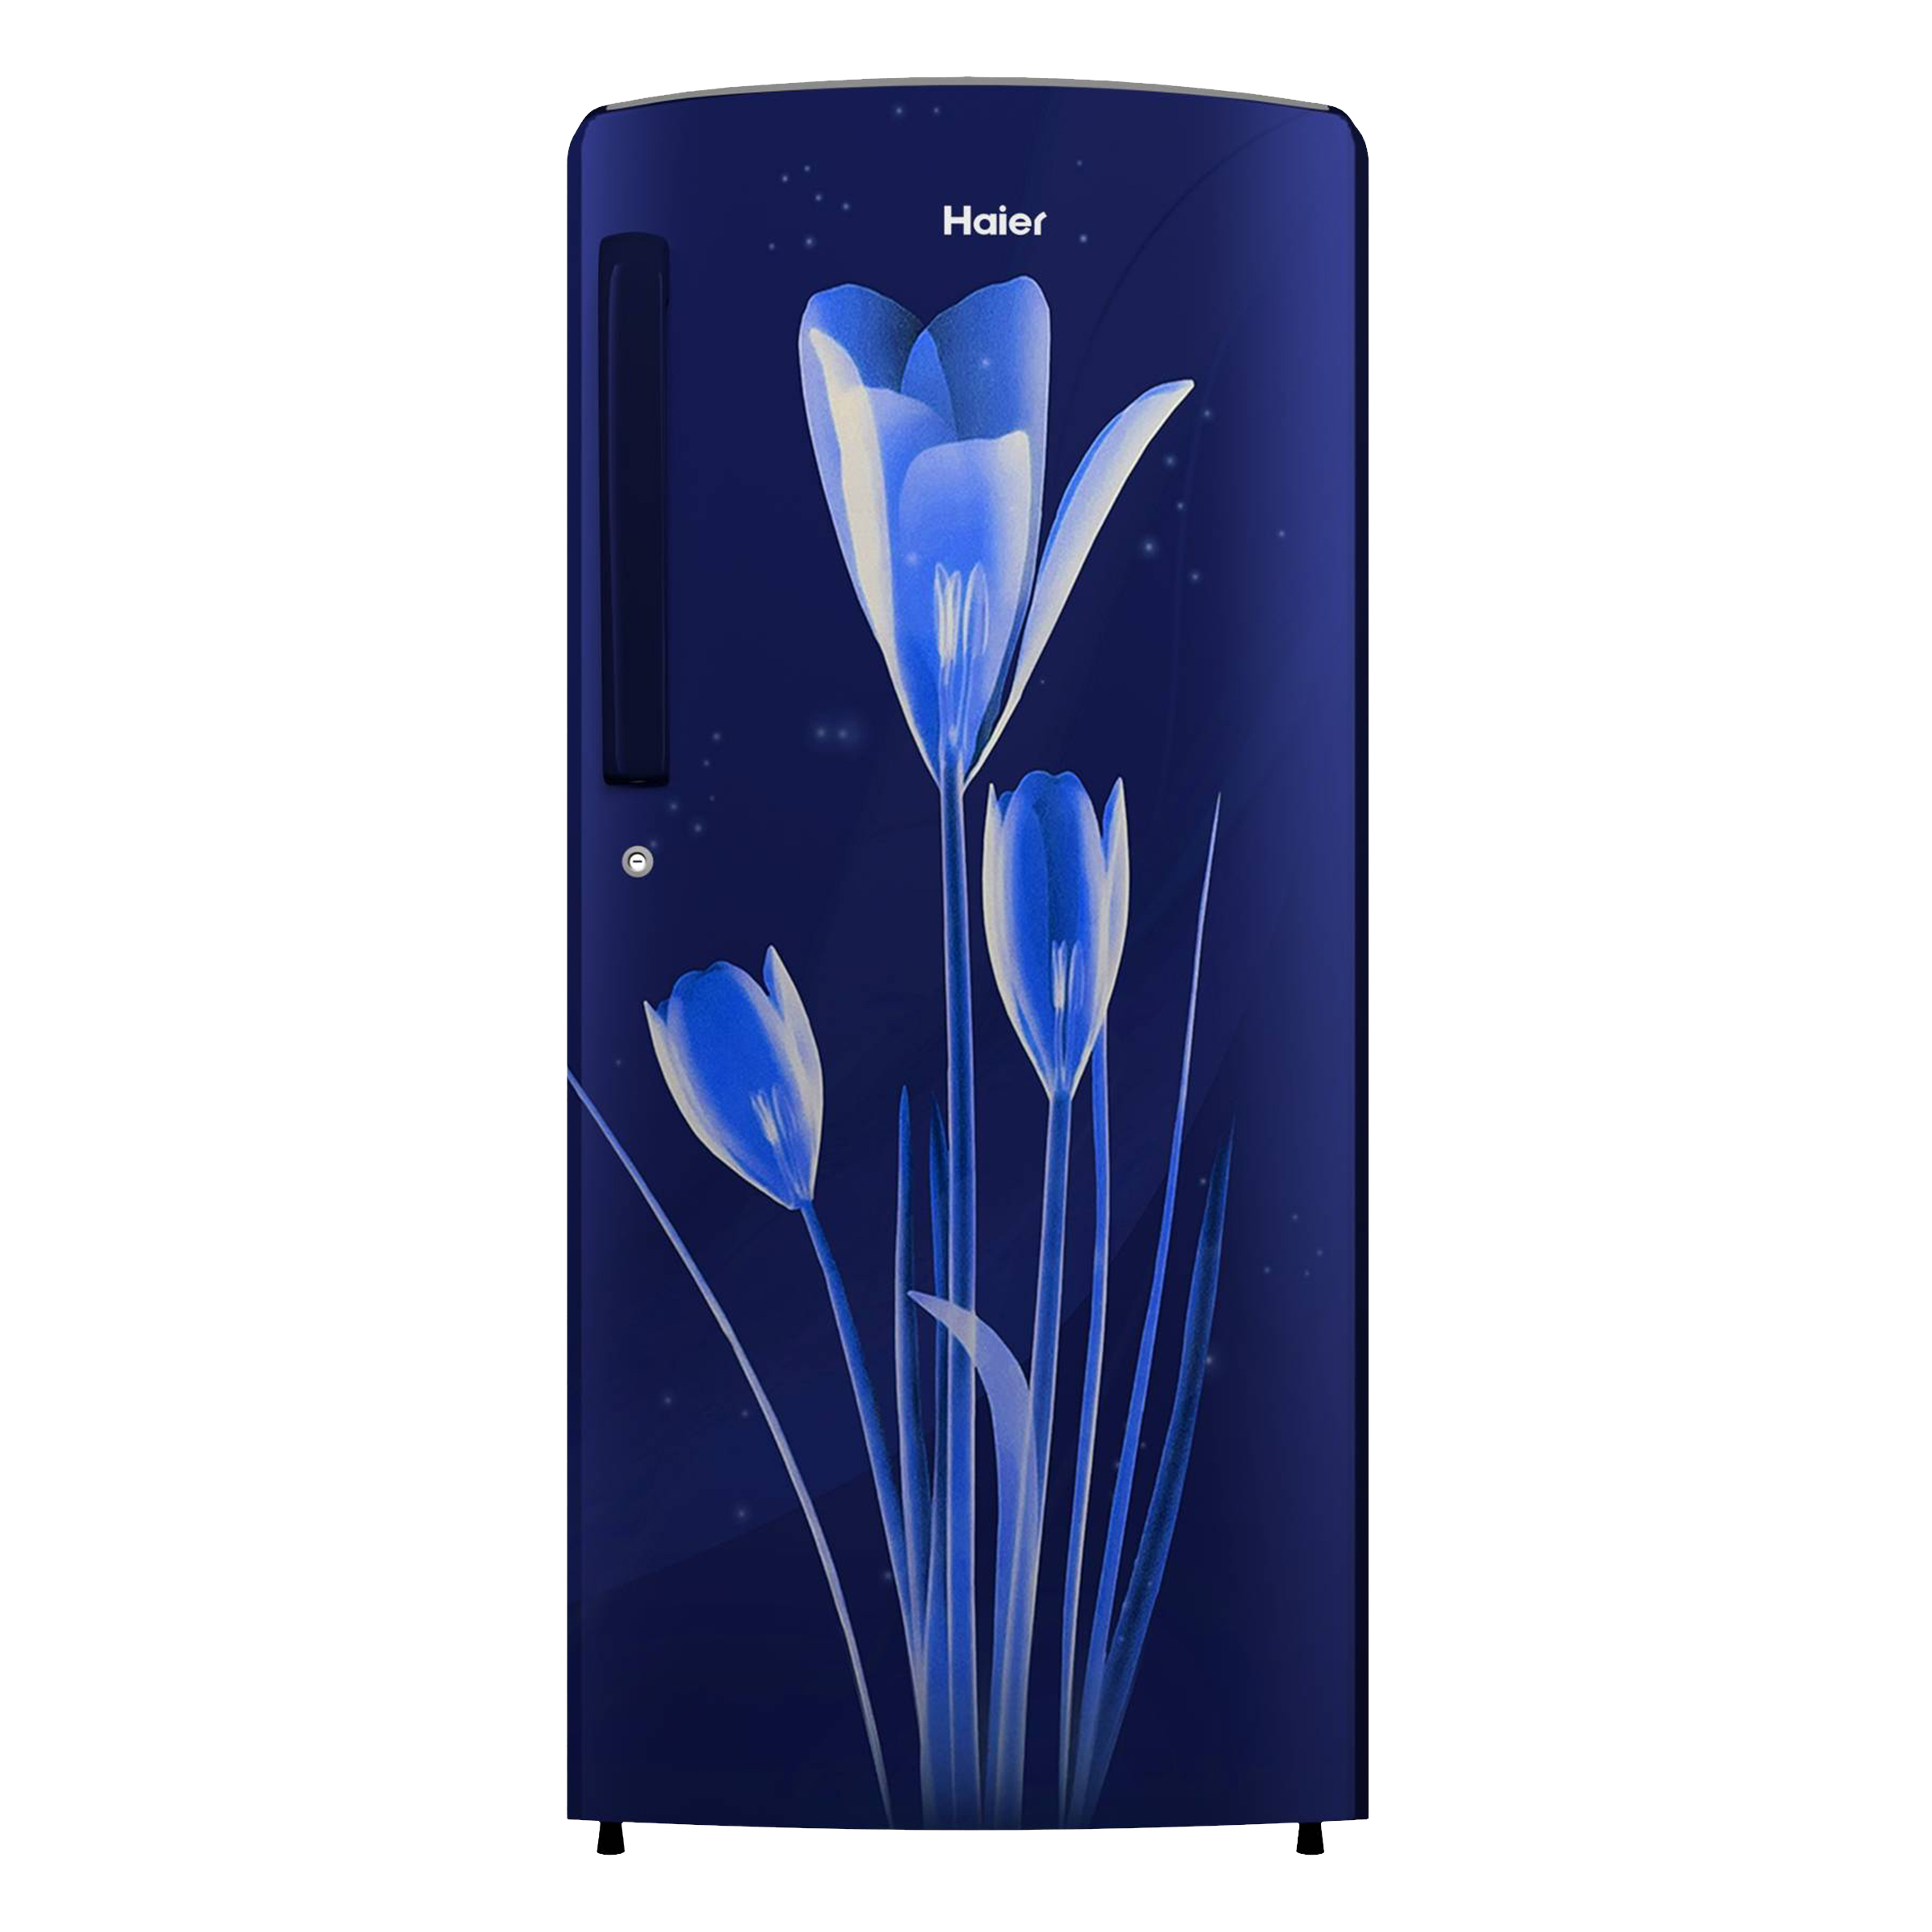 Haier 182 Liters 2 Star Direct Cool Single Door Refrigerator with Stabilizer Free Operation (HED-18BML, Marine Lily)_1